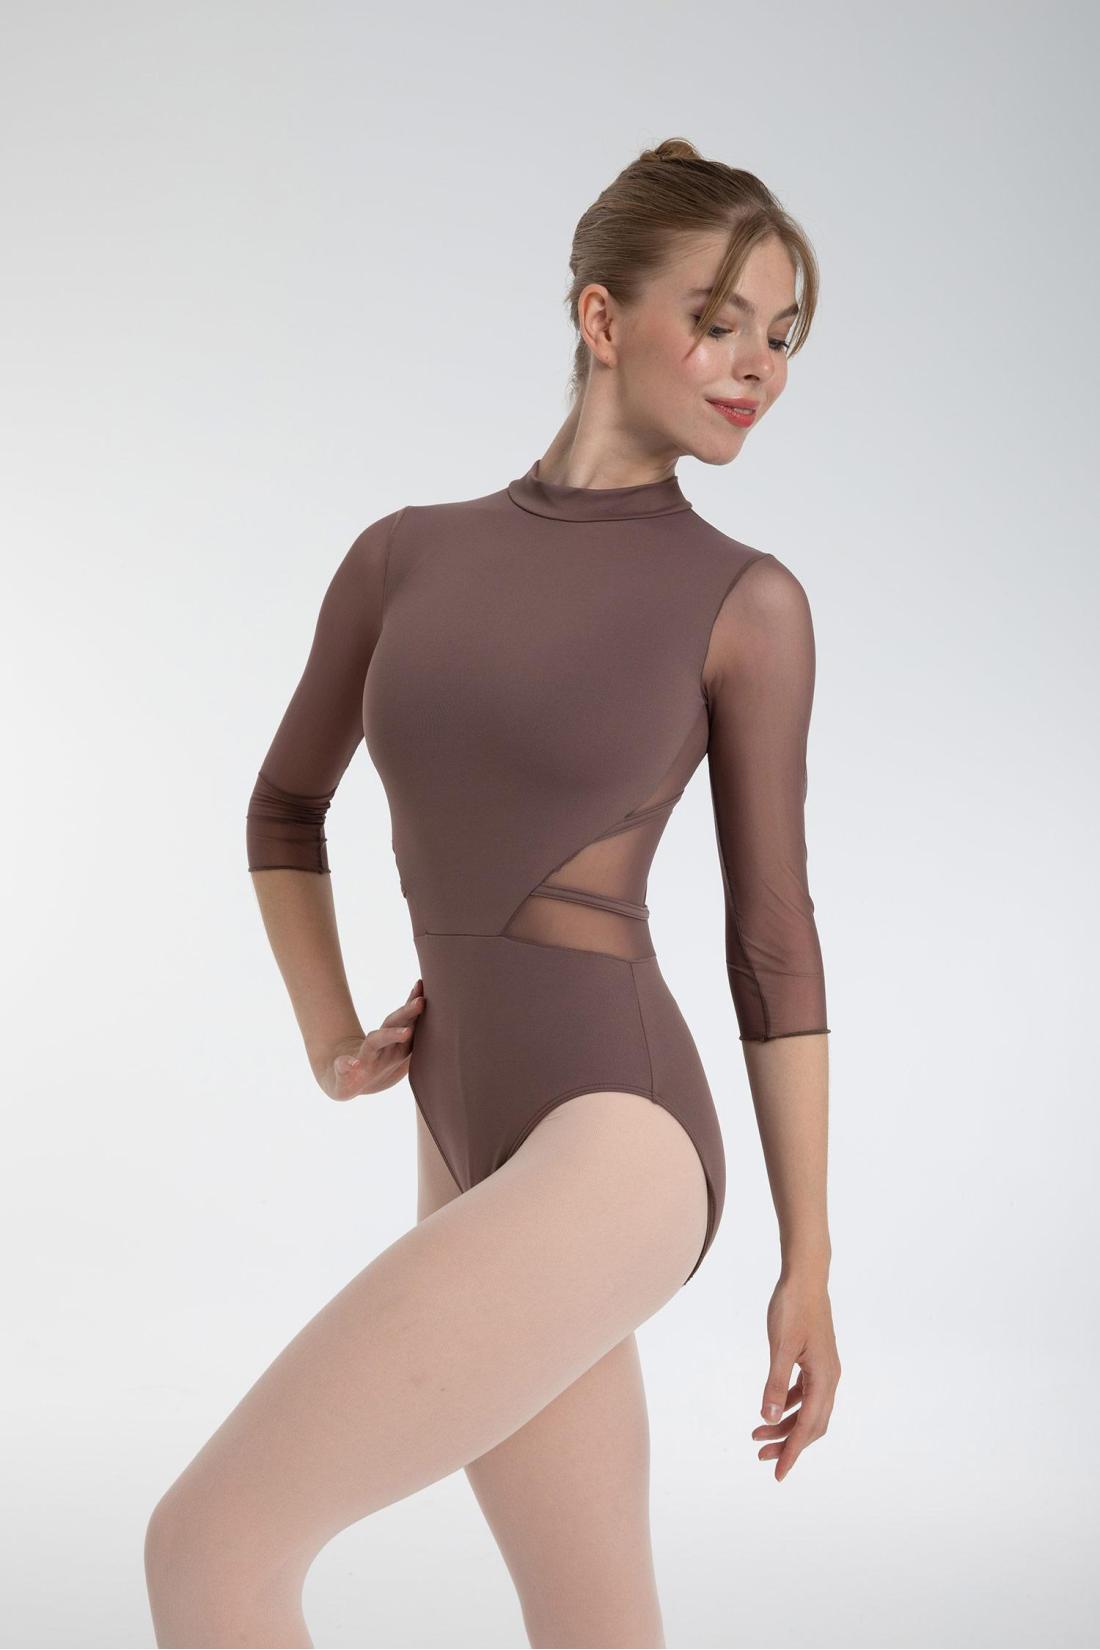 Adela Turtleneck 3/4 sleeve leotard with piping and mesh details Intermezzo ballet dance